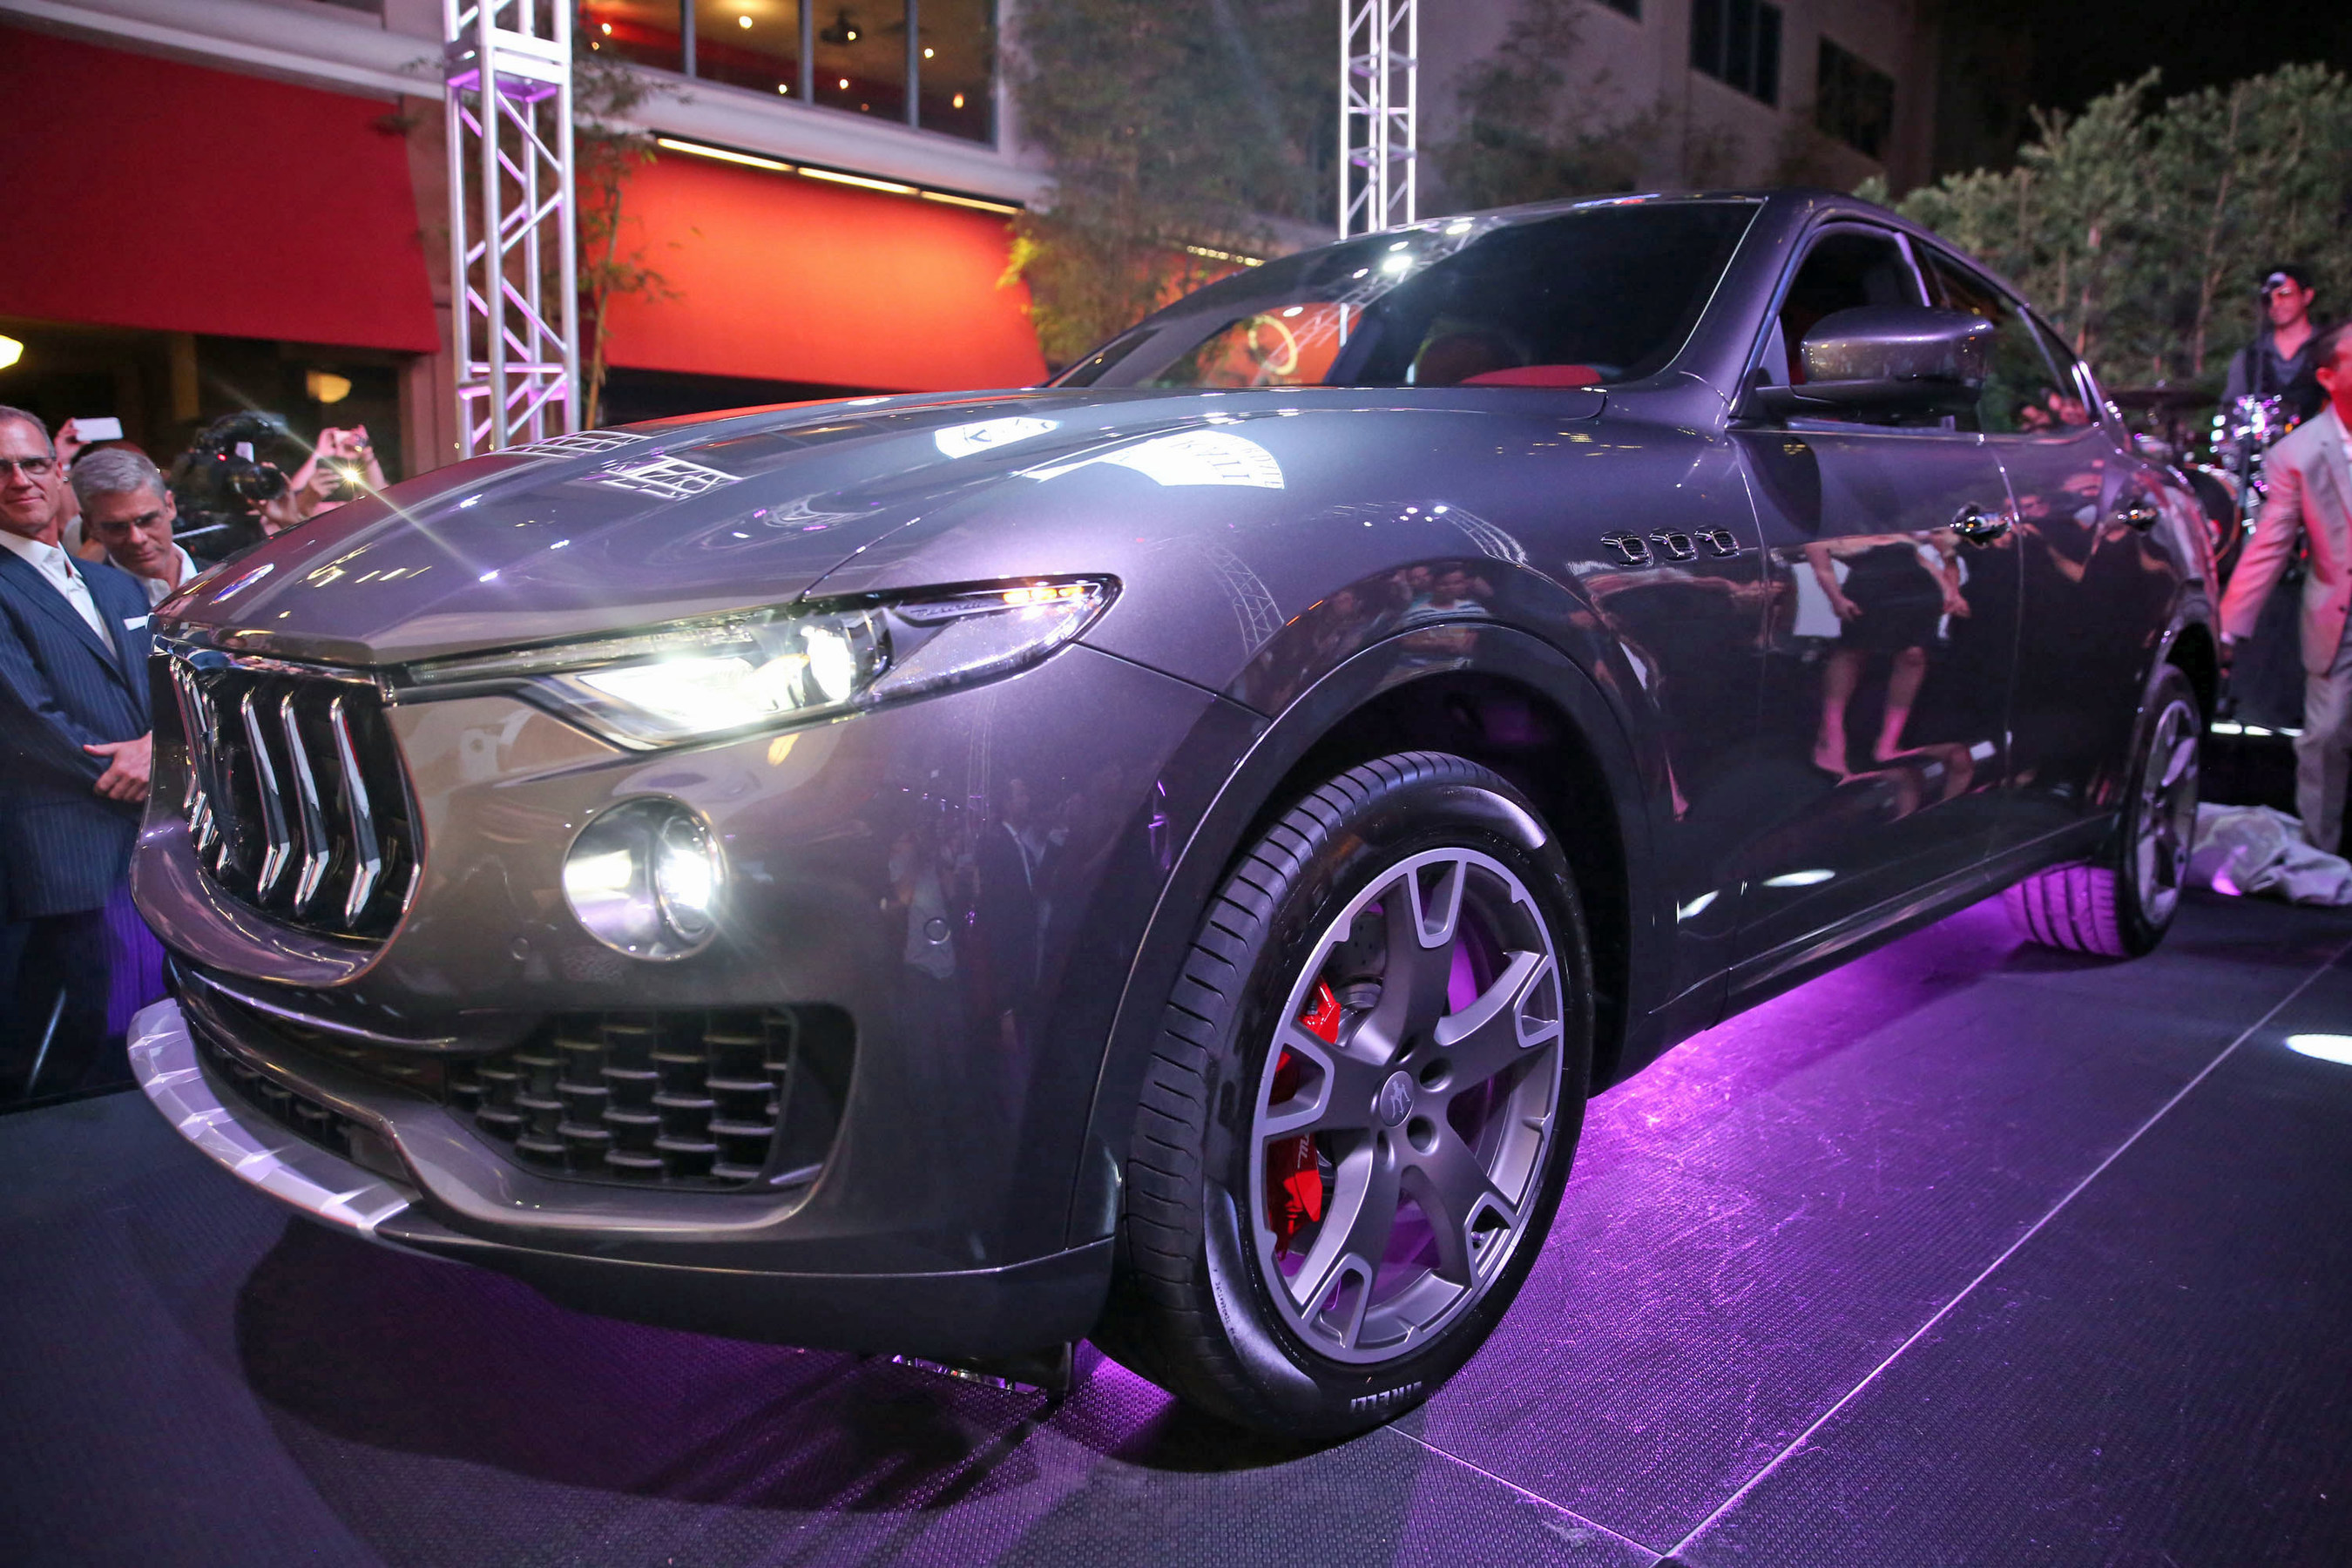 More than 500 VIP guests joined Maserati Fort Lauderdale as it presented the official unveiling of the highly-anticipated new Maserati Levante SUV in South Florida during a private outdoor reception on April 14, 2016 at downtown Las Olas hotspot, YOLO.